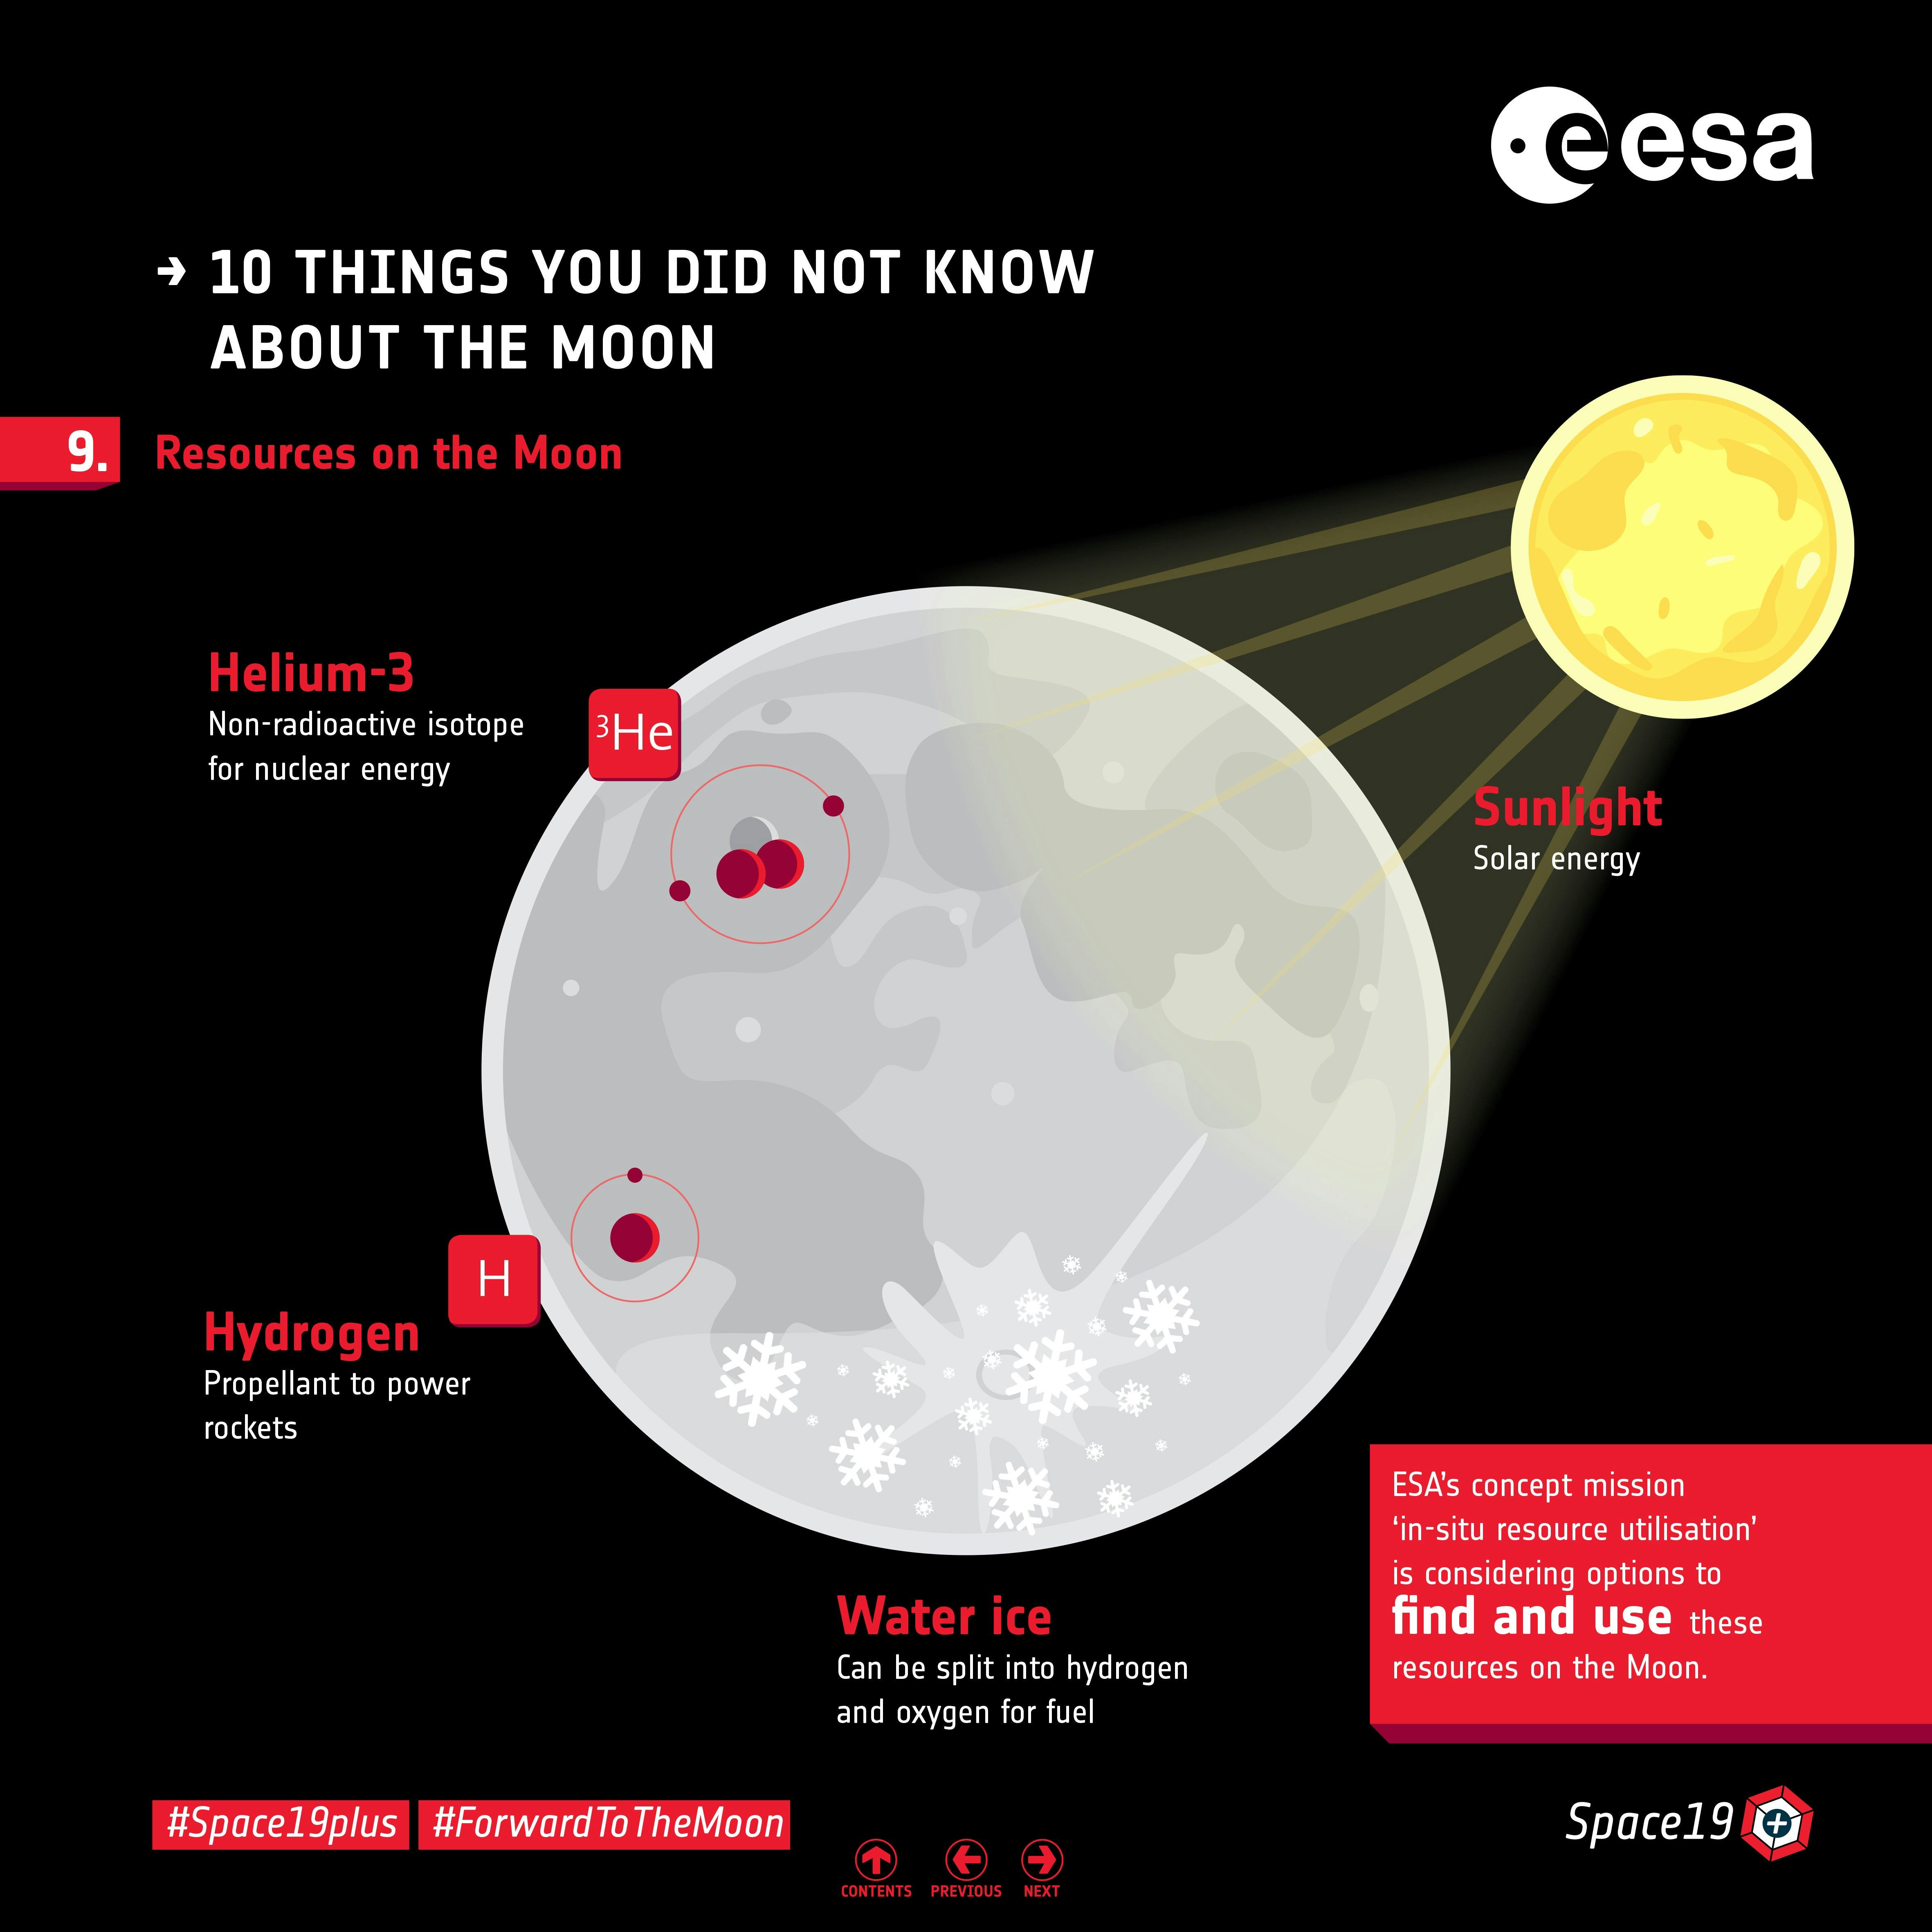 9. Resources on the Moon